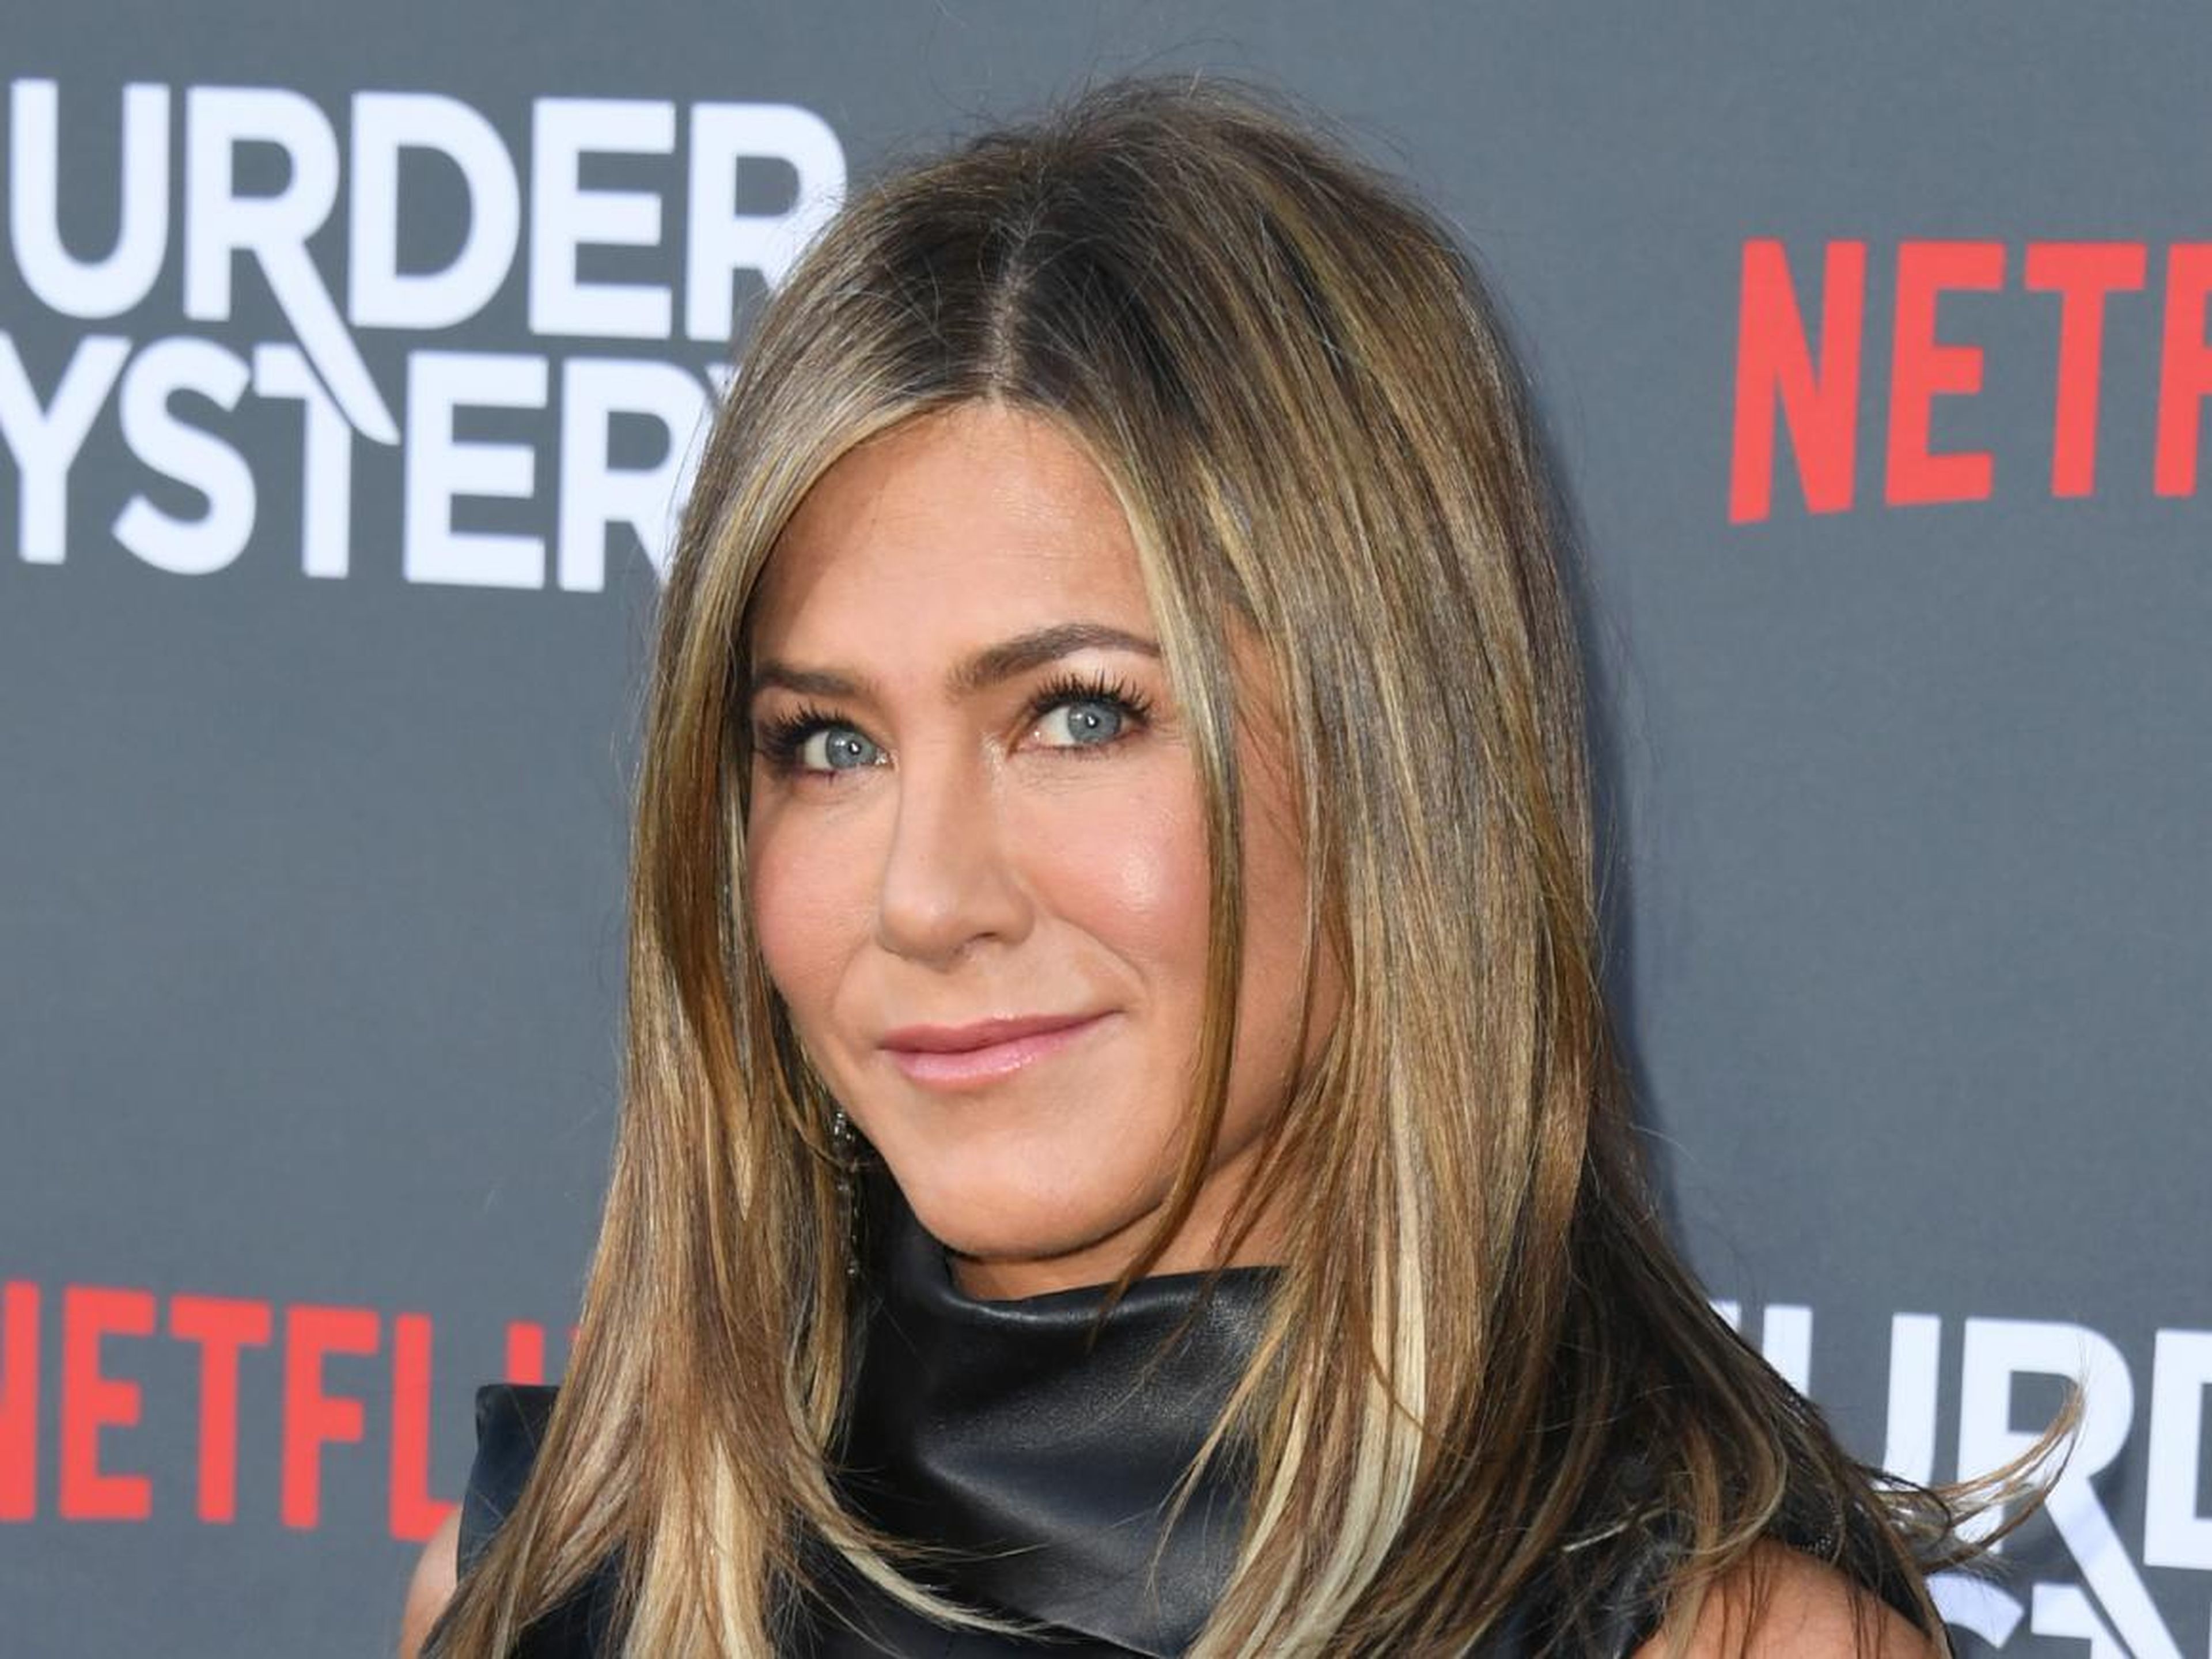 Most recently, Aniston starred in the 2019 Netflix film "Murder Mystery."